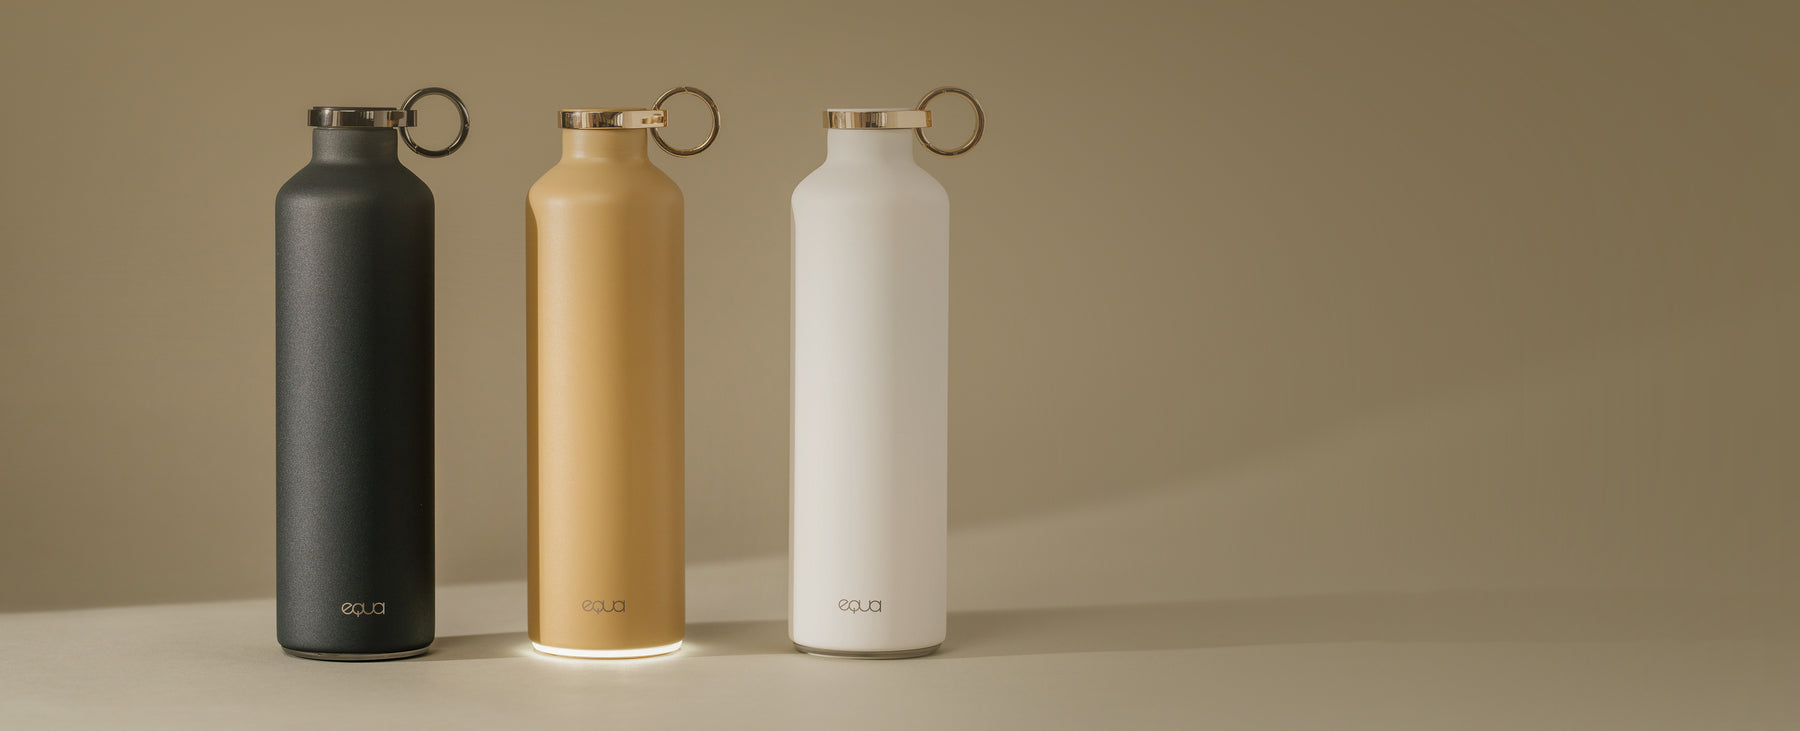 Puffy Cream Glass Bottle by EQUA – EQUA - Sustainable Water Bottles